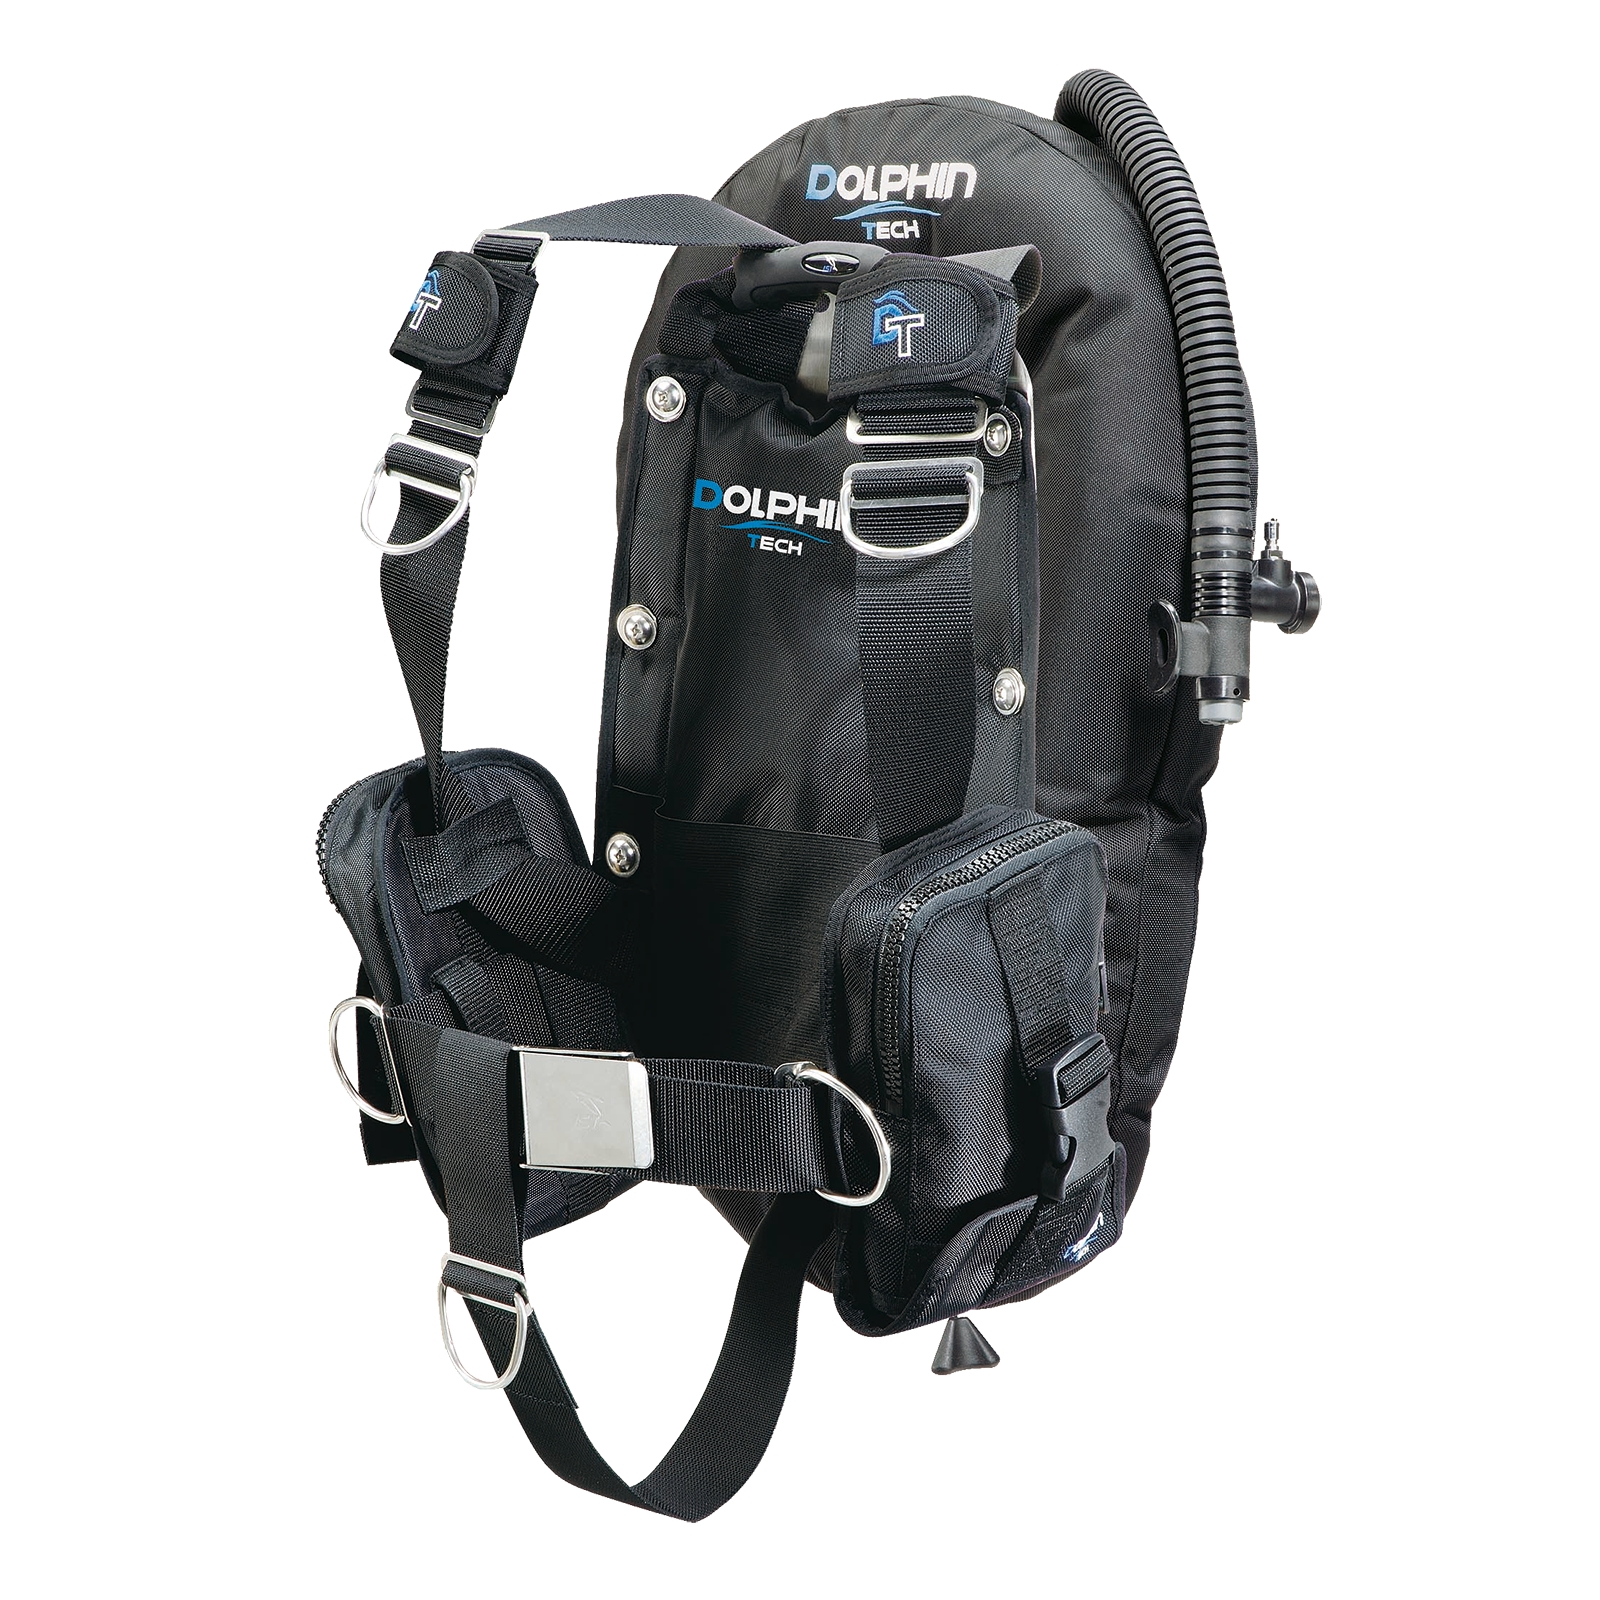 IST SPORTS CORP. :: TECHNICAL :: TECHNICAL BCD & BACK PLATE 